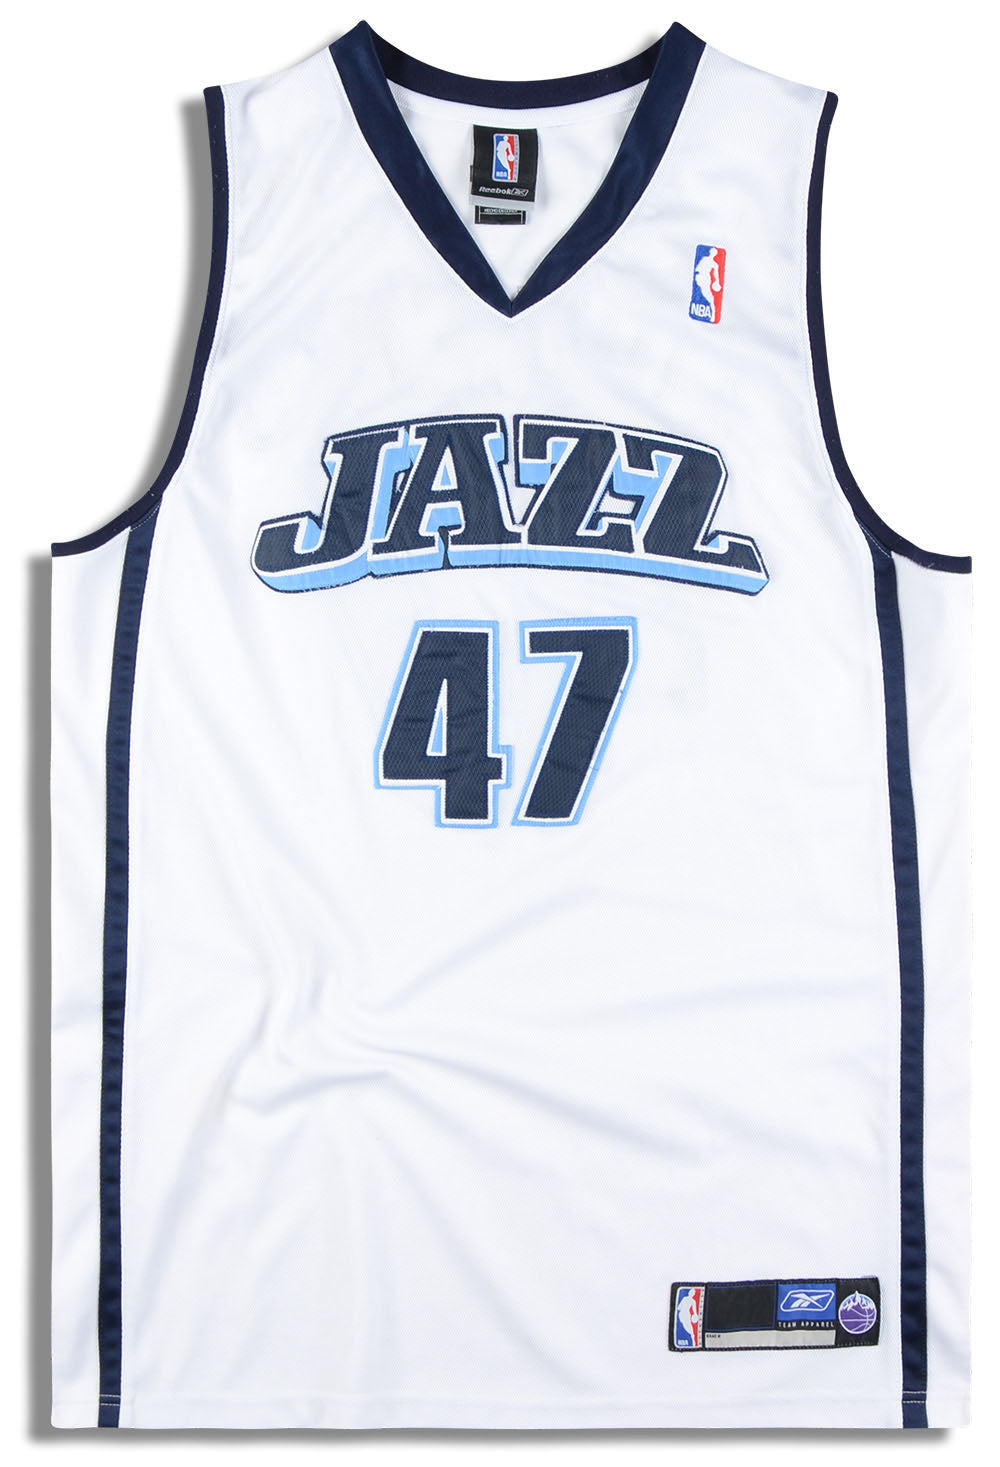 Top 5 Jazz Jerseys of All-Time – 4th Quarter Takes